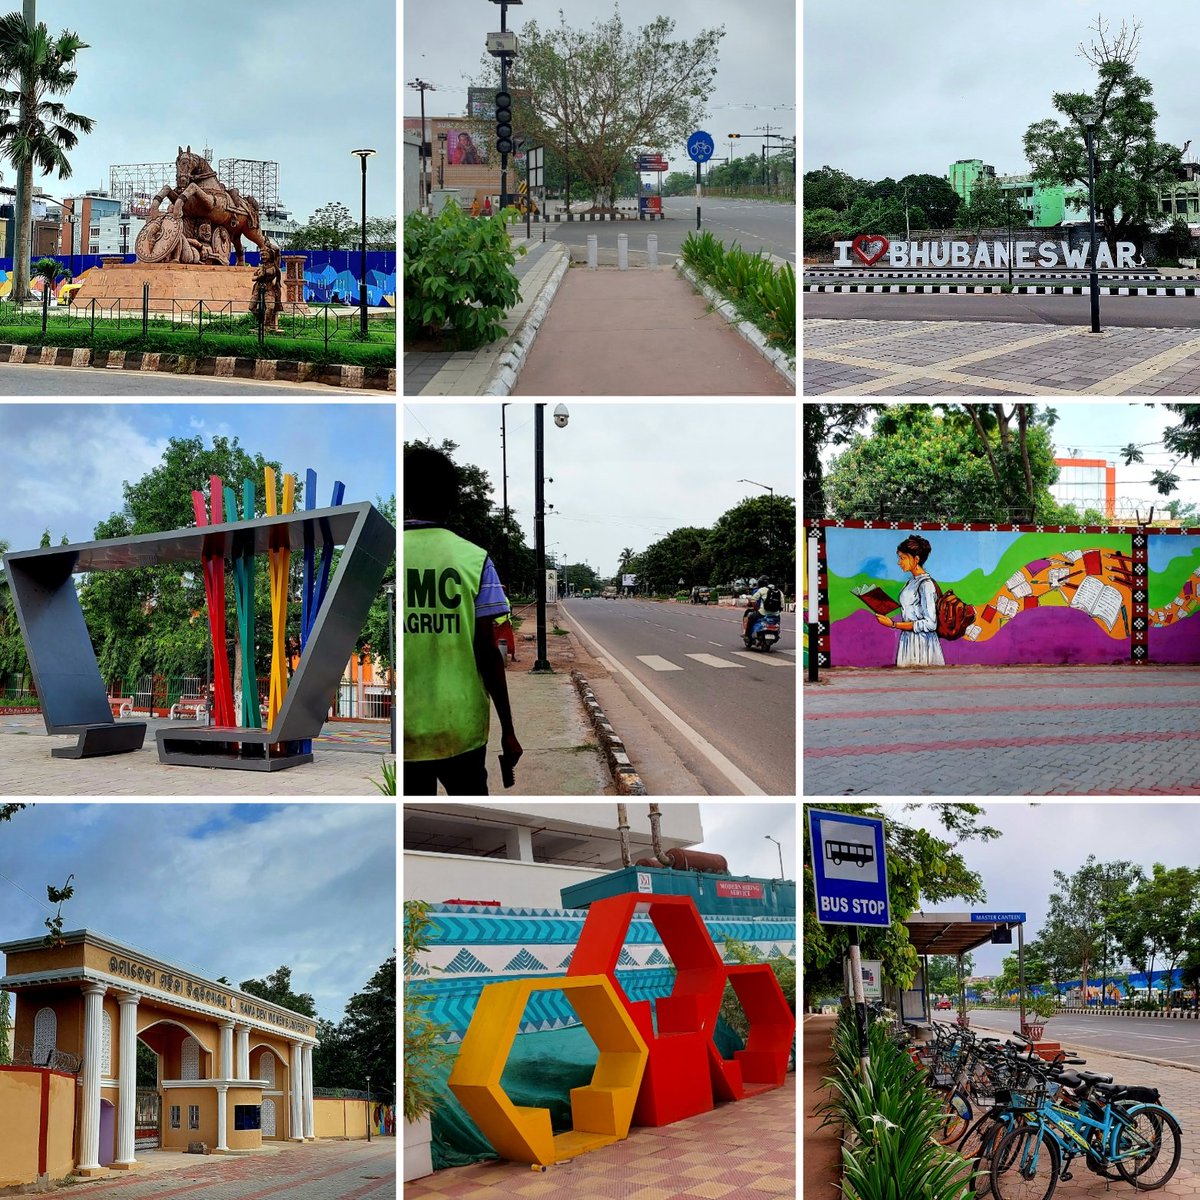 Happy 76th Foundation Day to the City of Bhubaneswar, the Capital of Odisha!
🎂✨️🙏🏾

#BhubaneswarFoundationDay 
#HappyBirthdayBhubaneswar 
#BhubaneswarDay

(Sharing some of my last year's clicks of the city)